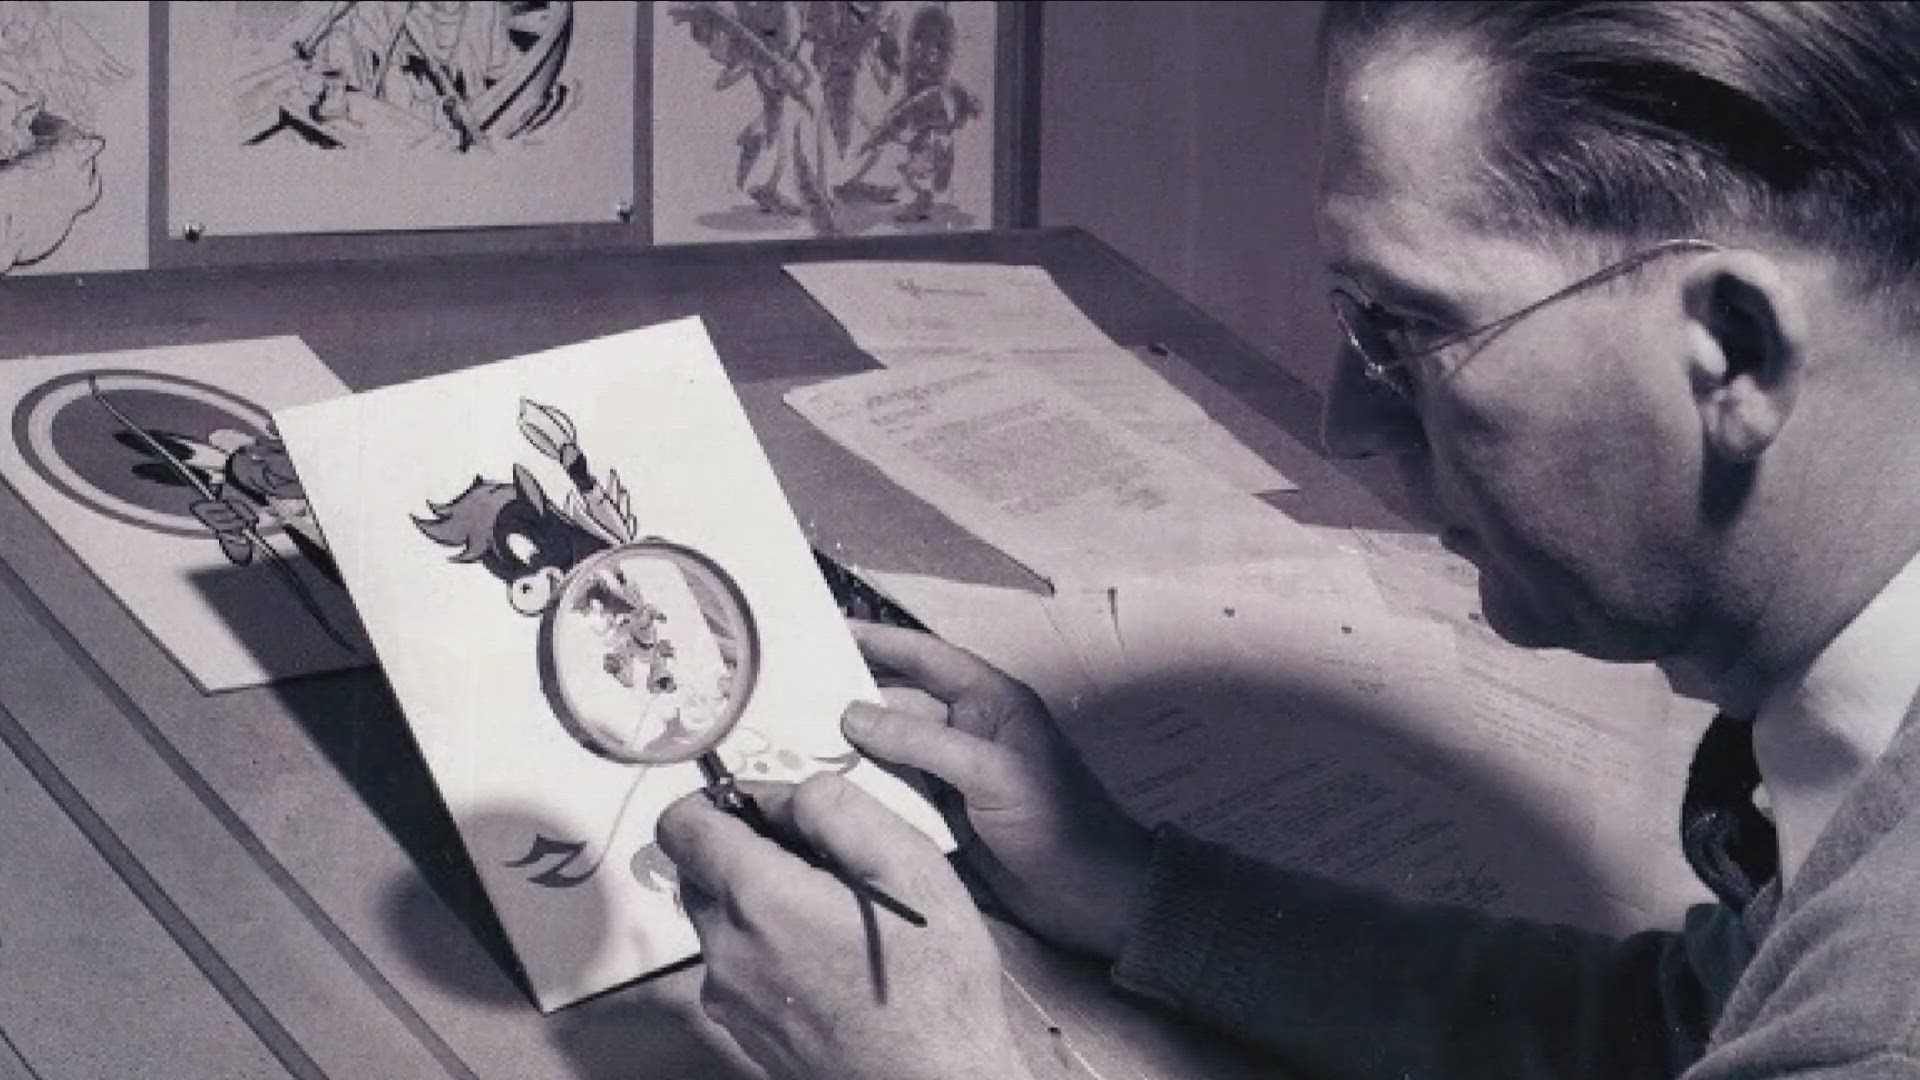 The Unknown Story of WNY on how Hank Porter went from Albion to becoming Walt Disney's go-to artist.